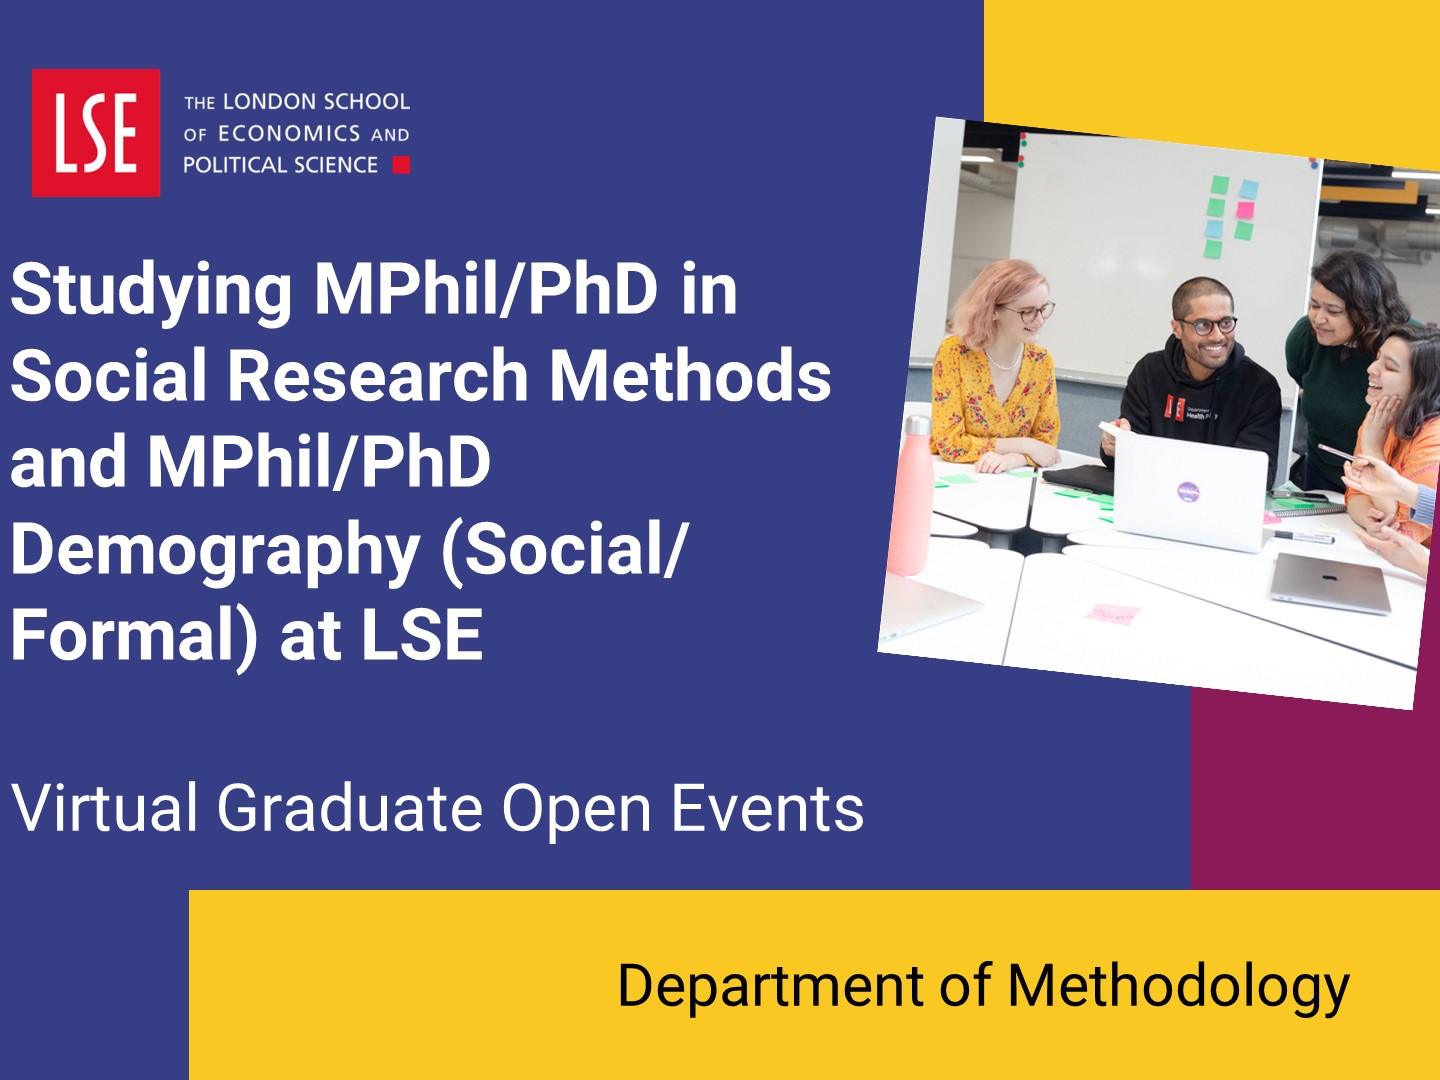 Introduction to MPhil/PhD in Social Research Methods/Demography